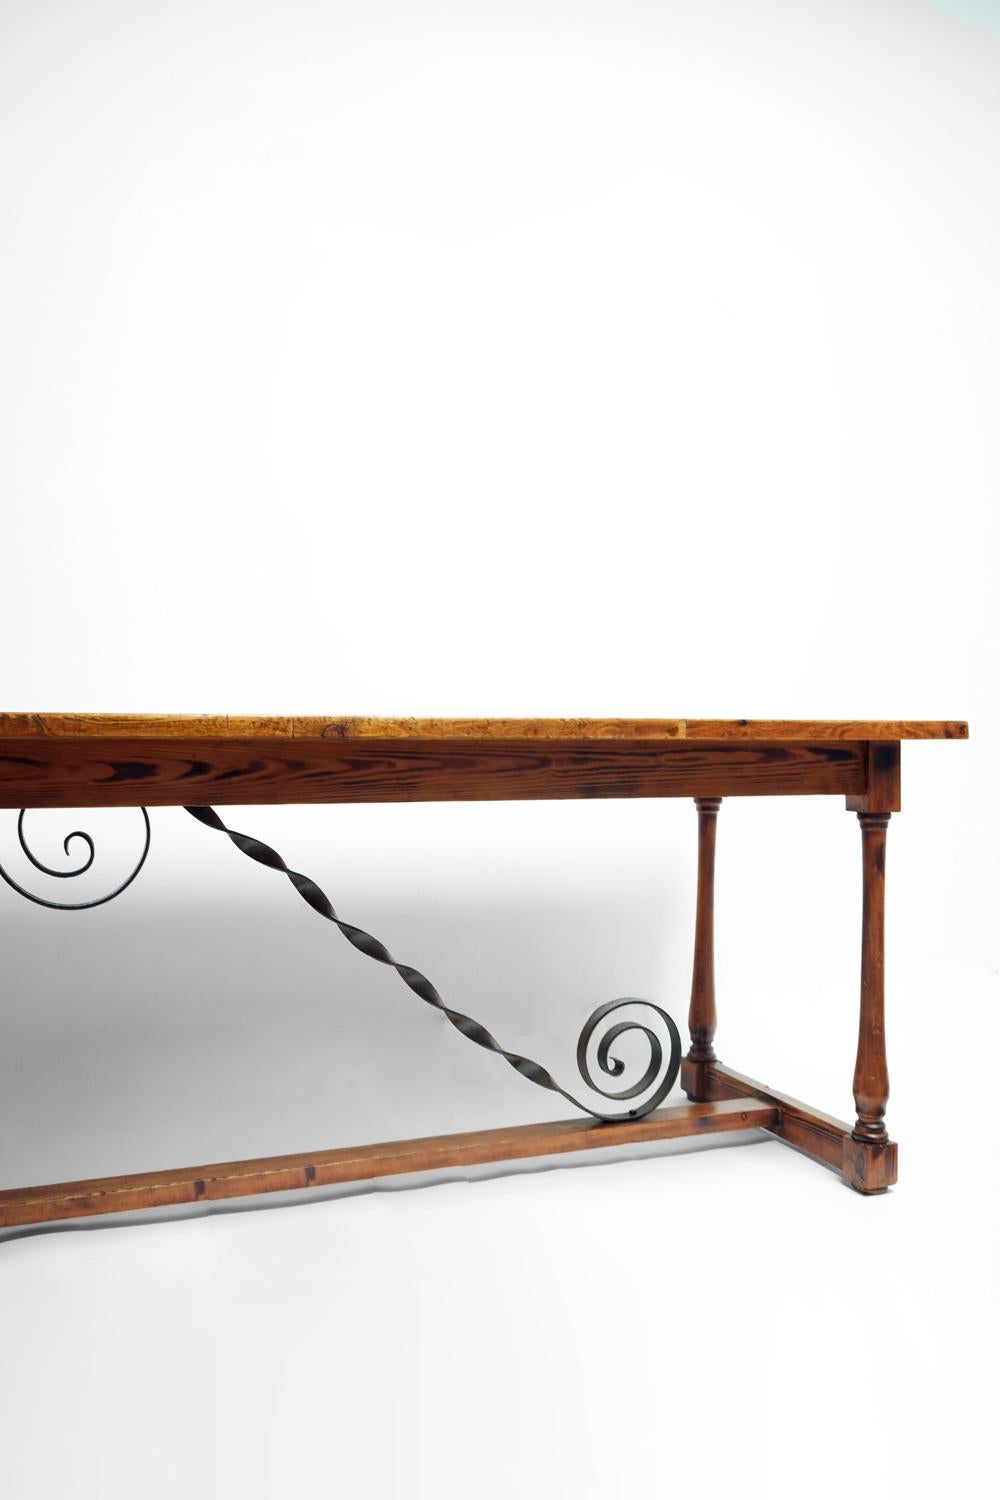 Space Age Pine and ironwork console table, 1910s.